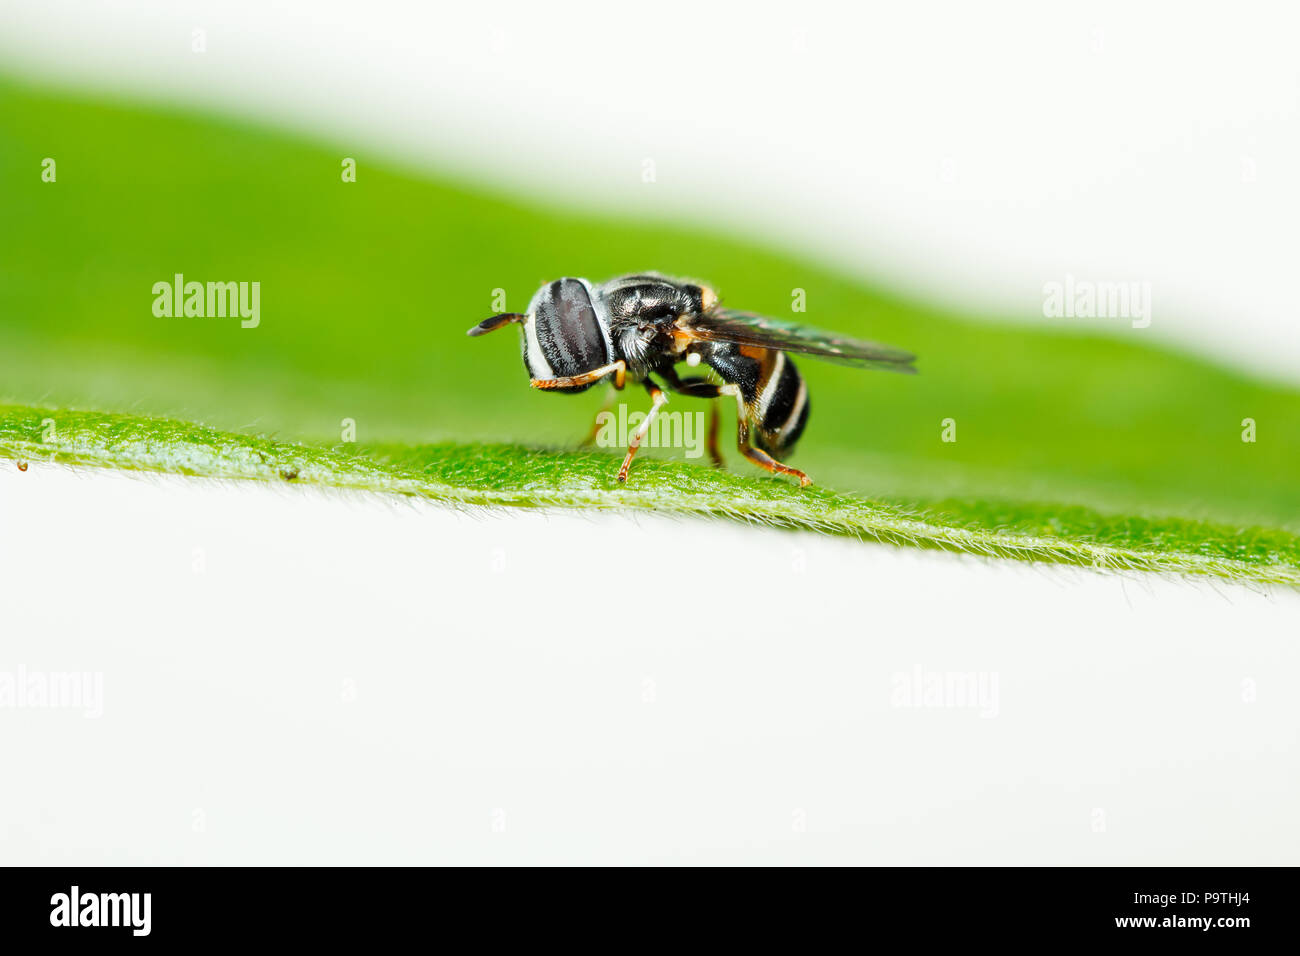 Cute bee mimic hoverfly (flower/syrphid fly) on green grass leaf Stock Photo